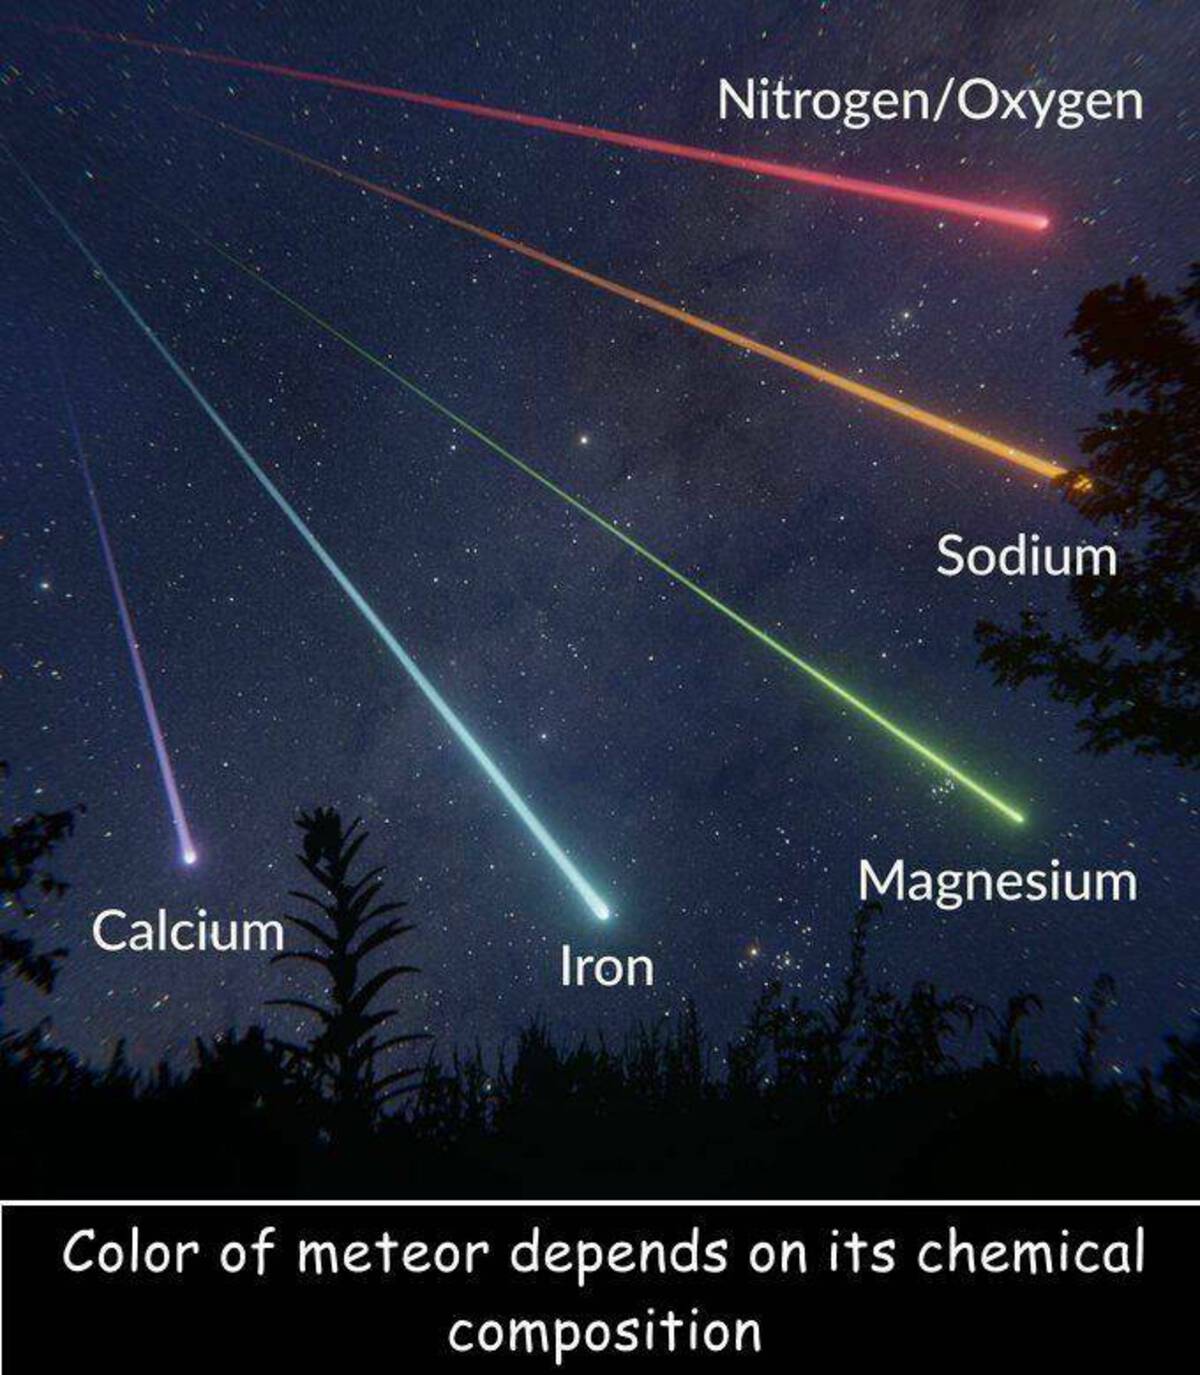 comet - NitrogenOxygen Sodium Magnesium Calcium Iron Color of meteor depends on its chemical composition